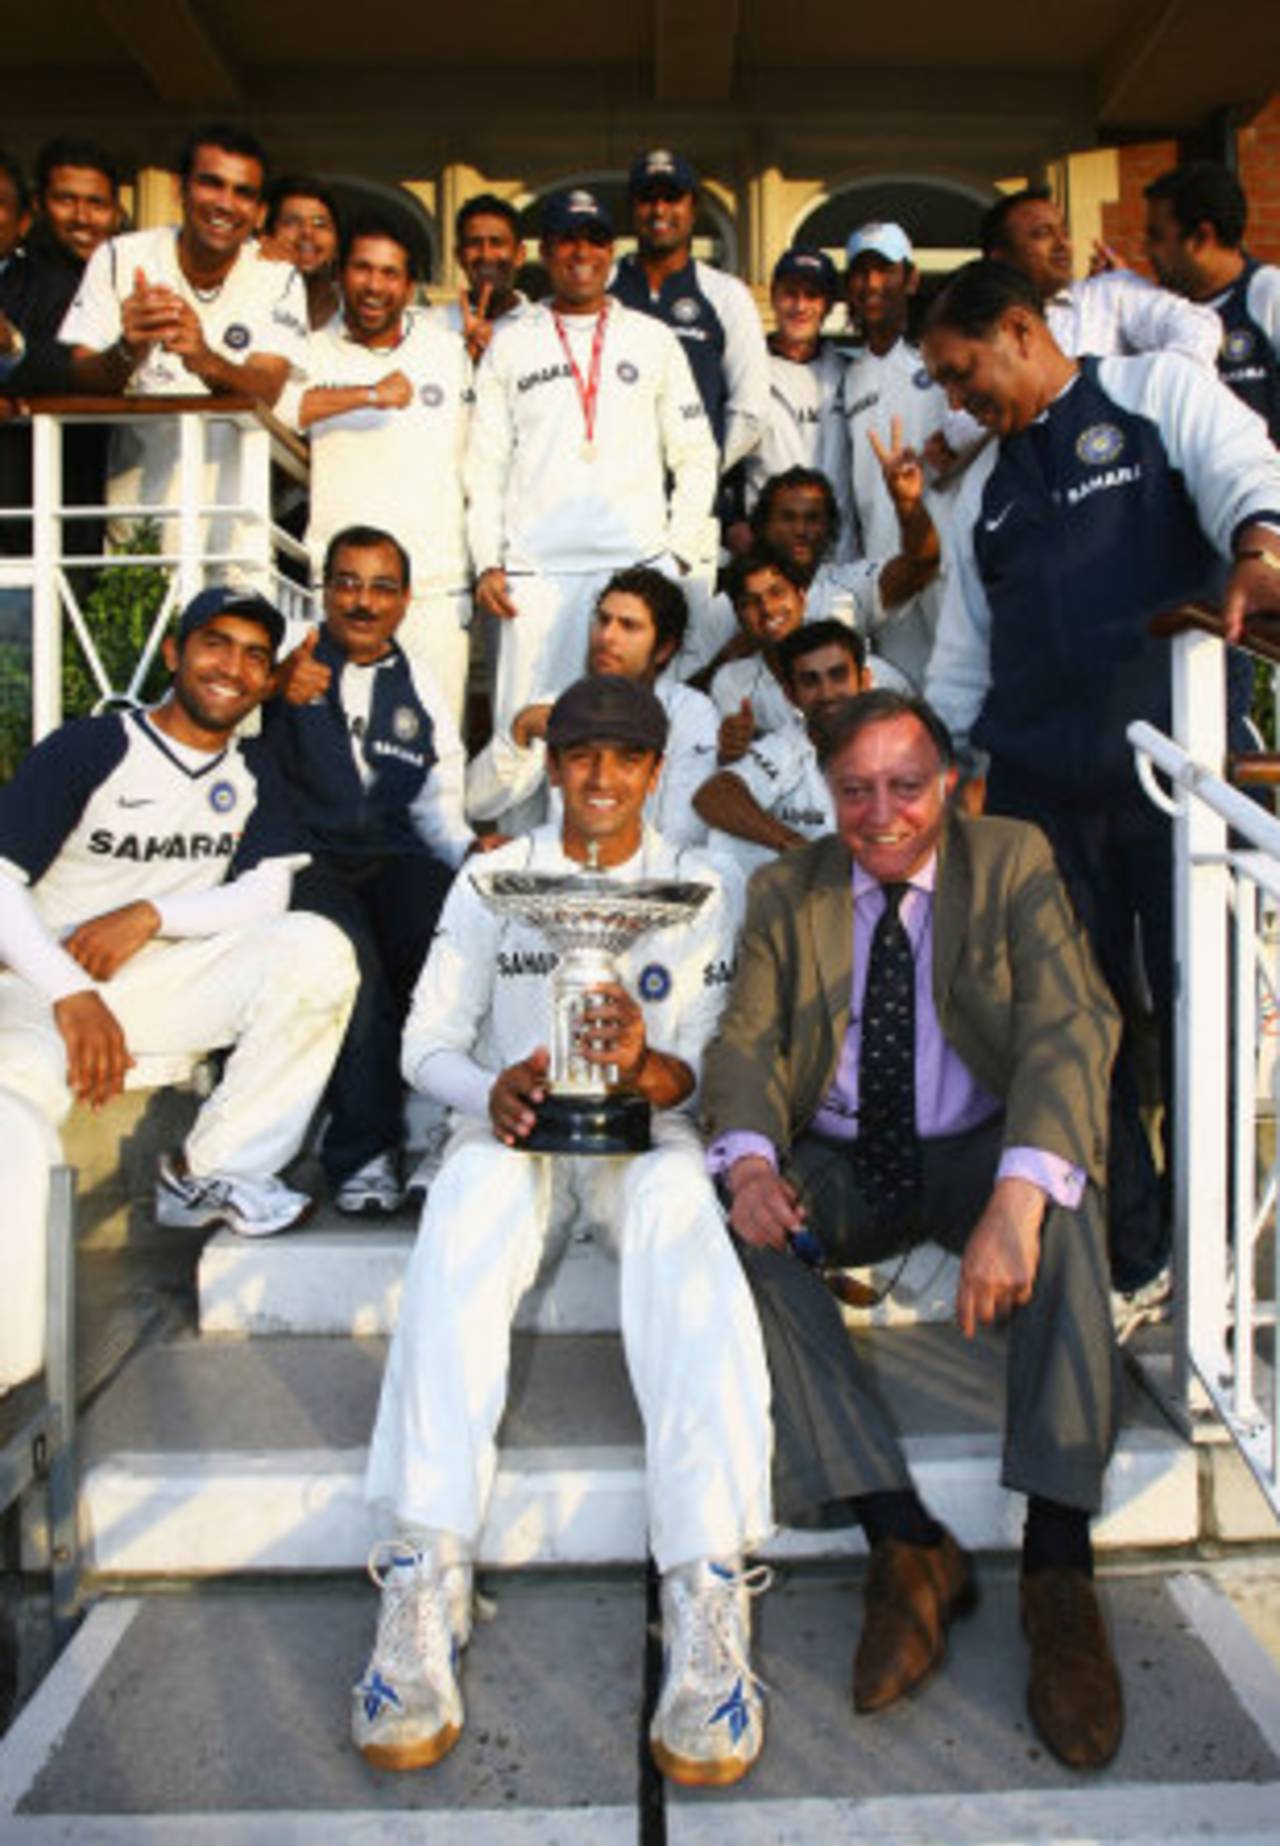 Mansur Ali Khan celebrates with the Indian team as Rahul Dravid holds the Pataudi trophy after India beat England in 2007